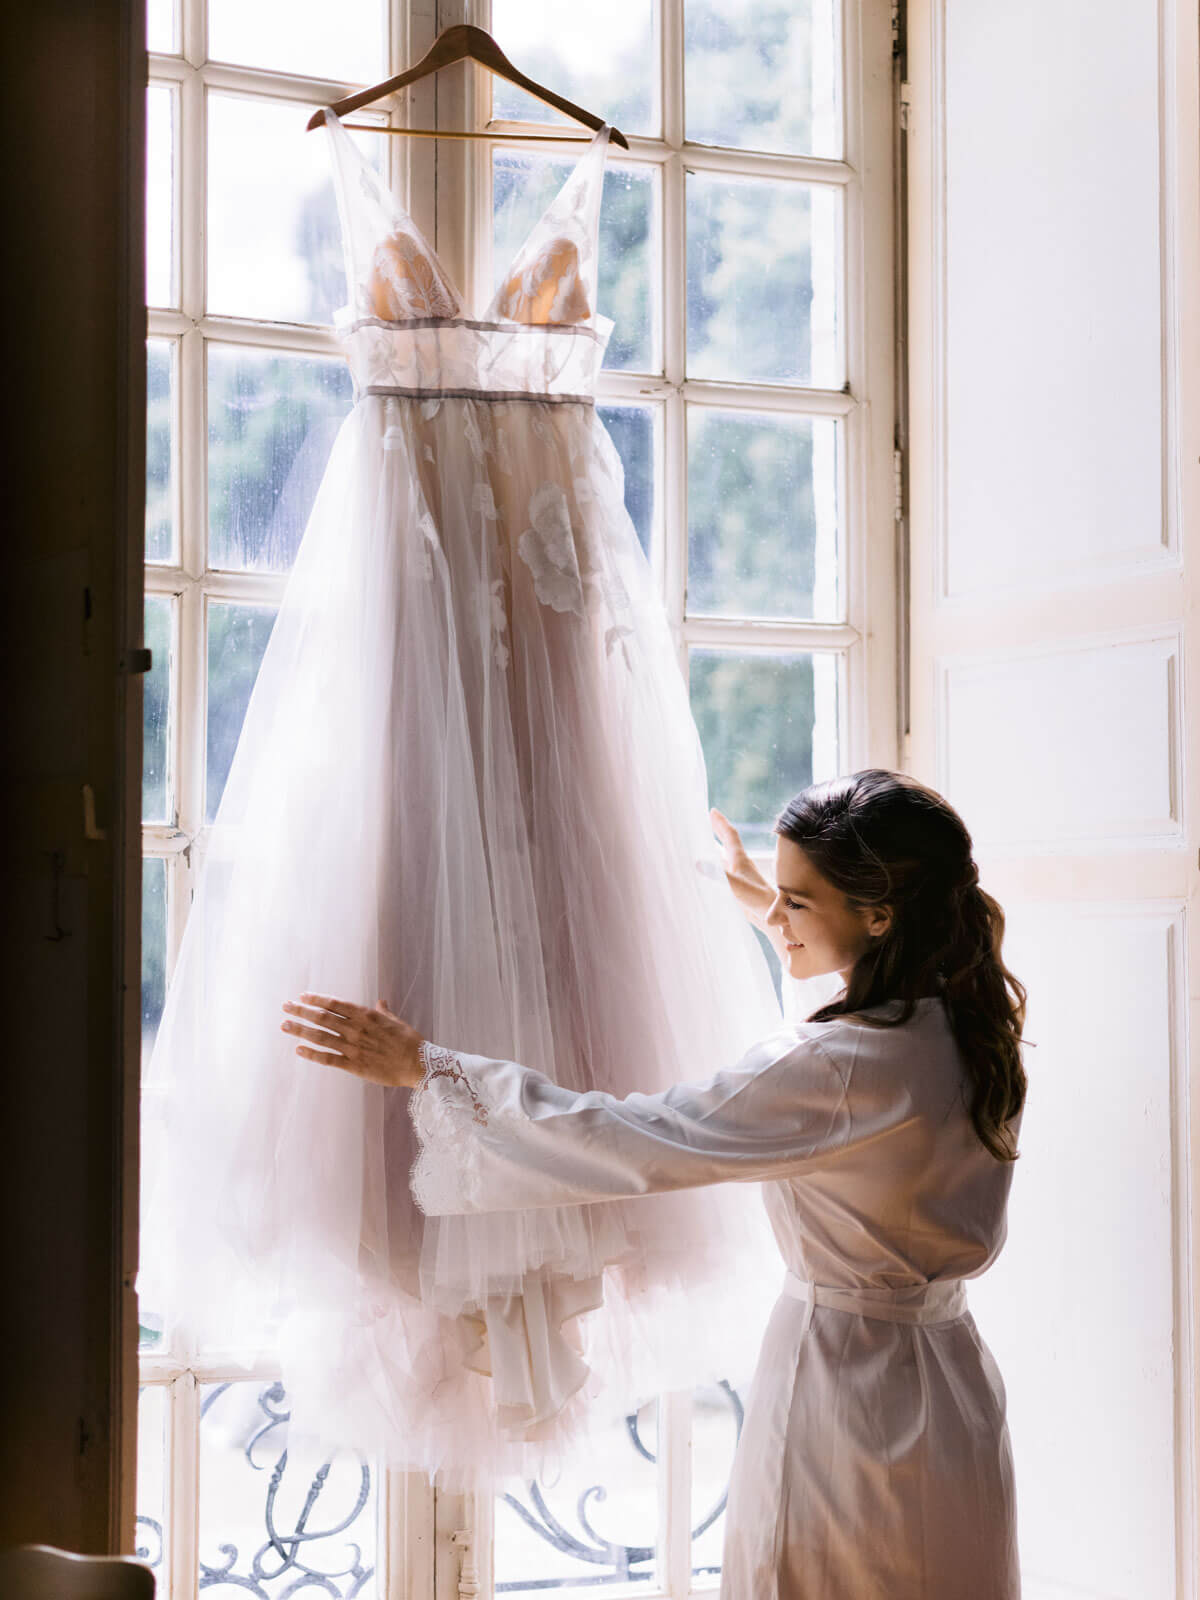 The bride, wearing a robe, is happily touching her wedding dress. Image by Destination Wedding Photographer Jenny Fu